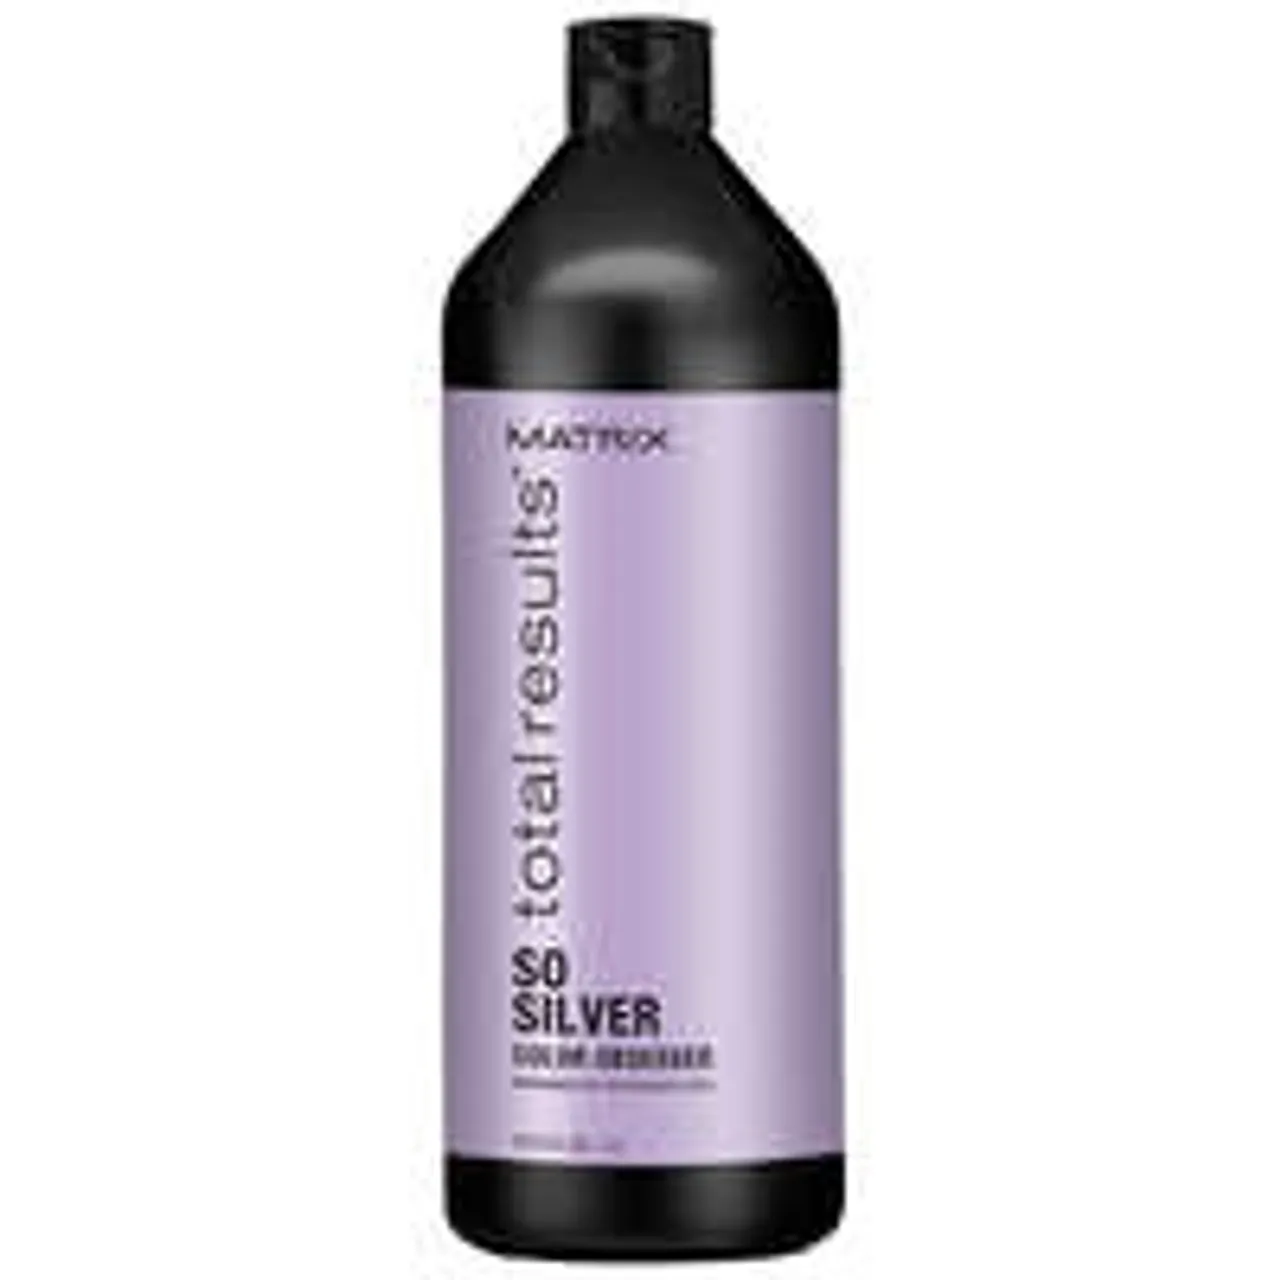 Matrix Total Results Color Obsessed So Silver Shampoo for Toning Blondes Grey and Silver Hair 1000ml